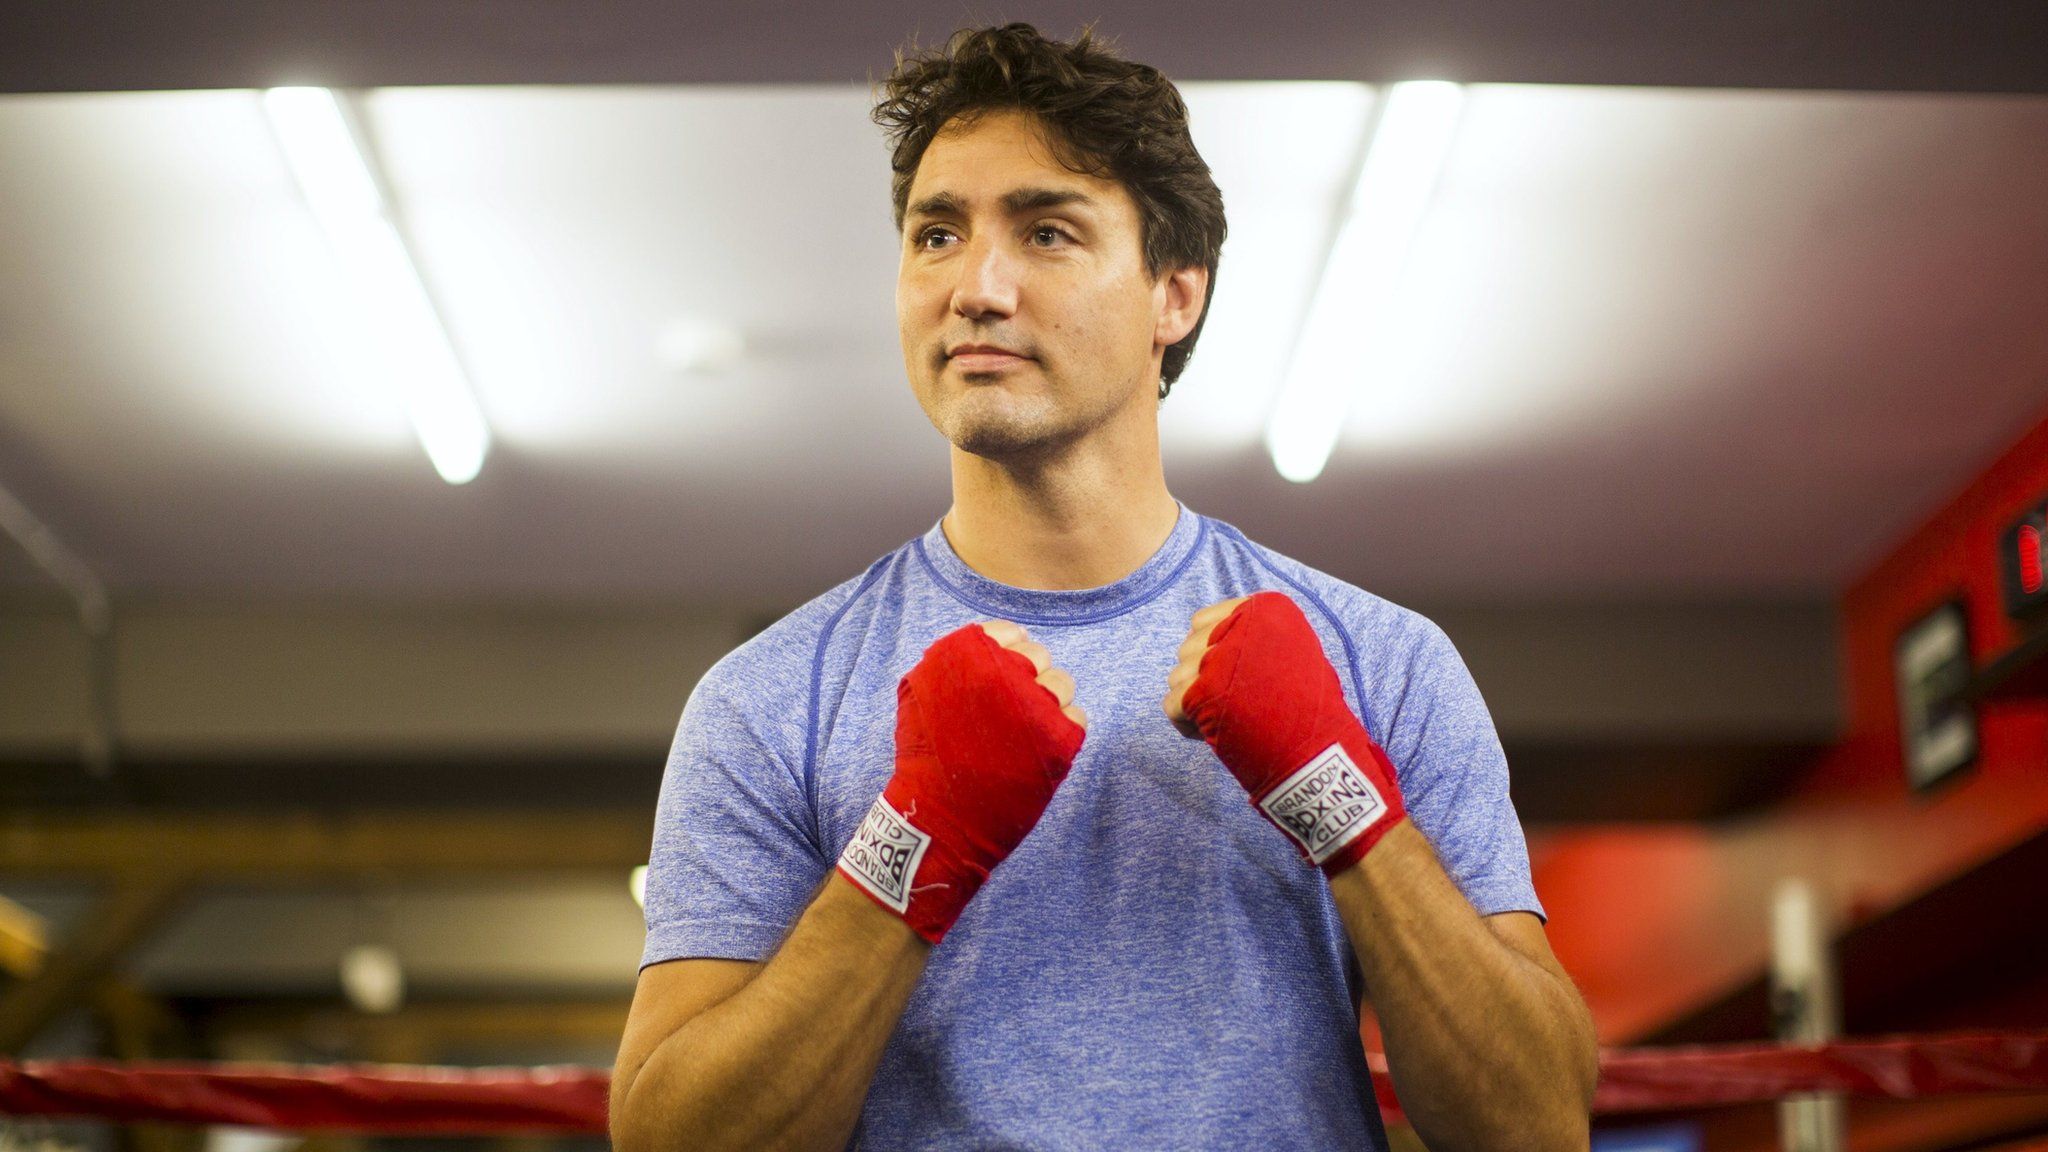 Canada election: Seven things Justin Trudeau believes in